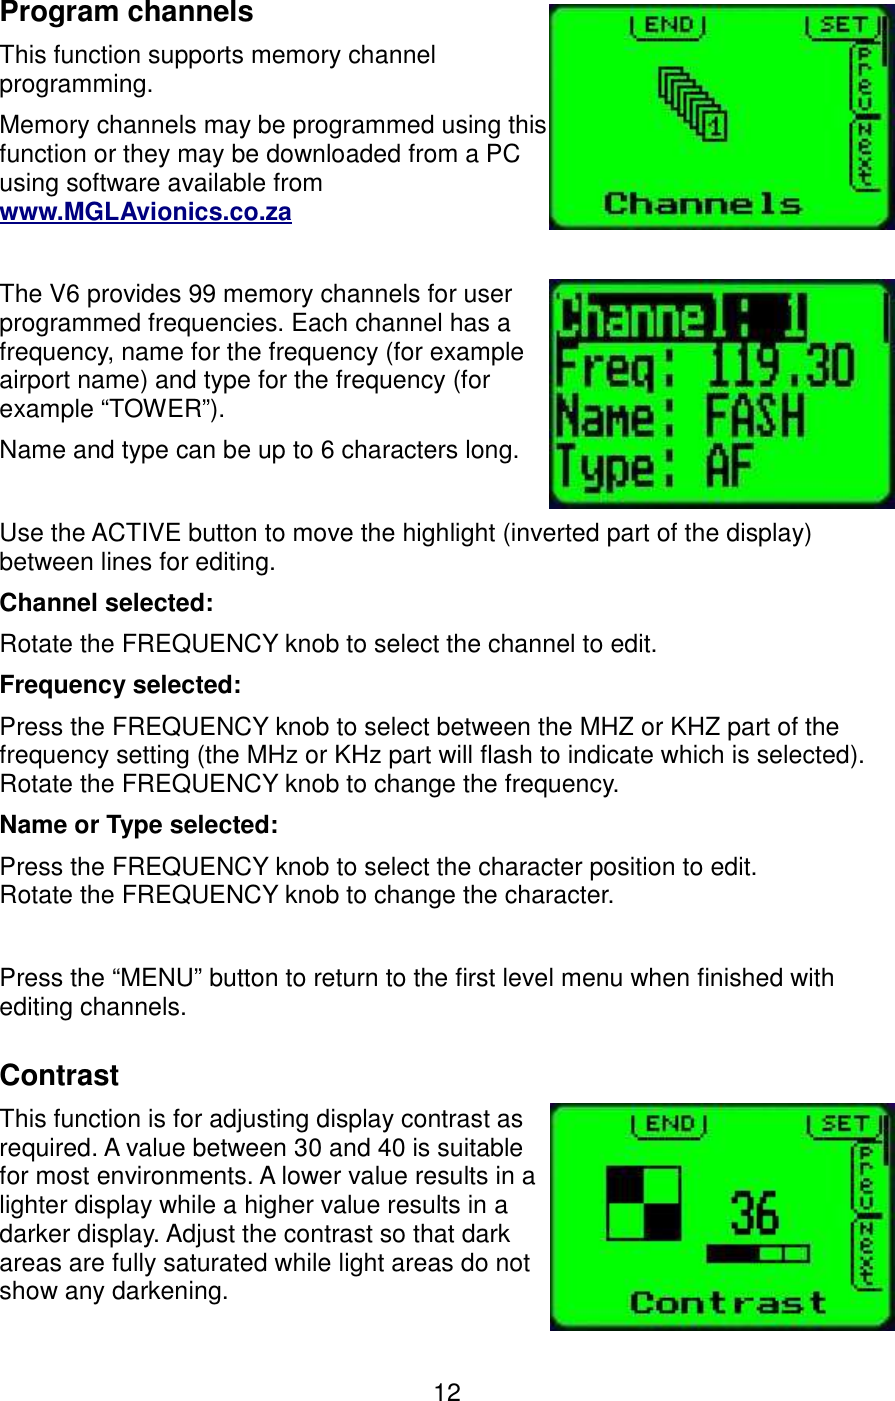 Program channelsThis function supports memory channel programming.Memory channels may be programmed using this function or they may be downloaded from a PC using software available from www.MGLAvionics.co.zaThe V6 provides 99 memory channels for user programmed frequencies. Each channel has a frequency, name for the frequency (for example airport name) and type for the frequency (for example “TOWER”).Name and type can be up to 6 characters long.Use the ACTIVE button to move the highlight (inverted part of the display) between lines for editing.Channel selected:Rotate the FREQUENCY knob to select the channel to edit.Frequency selected:Press the FREQUENCY knob to select between the MHZ or KHZ part of the frequency setting (the MHz or KHz part will flash to indicate which is selected).Rotate the FREQUENCY knob to change the frequency.Name or Type selected:Press the FREQUENCY knob to select the character position to edit.Rotate the FREQUENCY knob to change the character.Press the “MENU” button to return to the first level menu when finished with editing channels.ContrastThis function is for adjusting display contrast as required. A value between 30 and 40 is suitable for most environments. A lower value results in a lighter display while a higher value results in a darker display. Adjust the contrast so that dark areas are fully saturated while light areas do not show any darkening.12